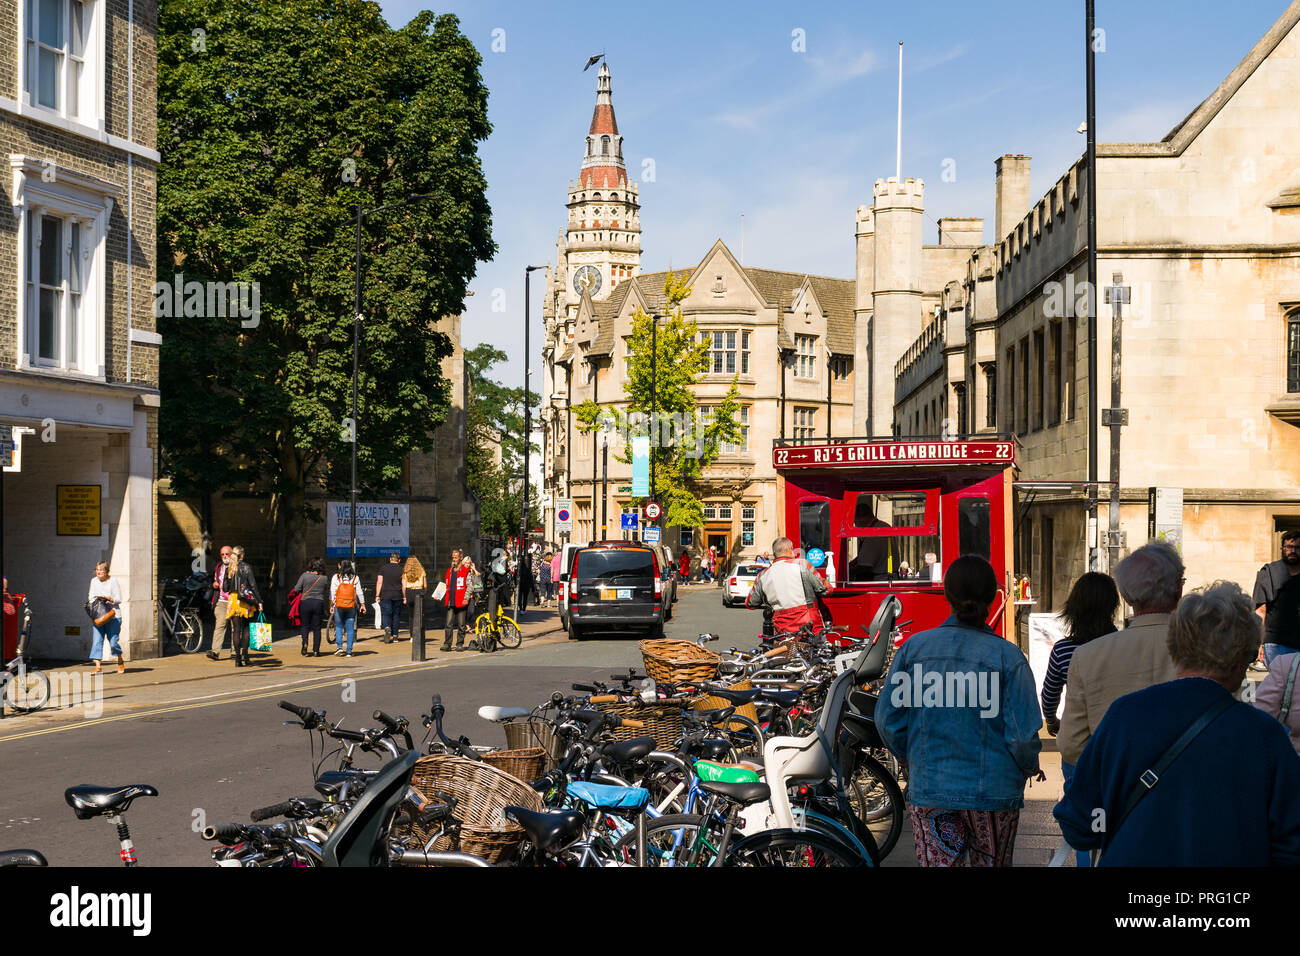 View down St Andrews Street with bicycles parked and people walking around, Cambridge, UK Stock Photo